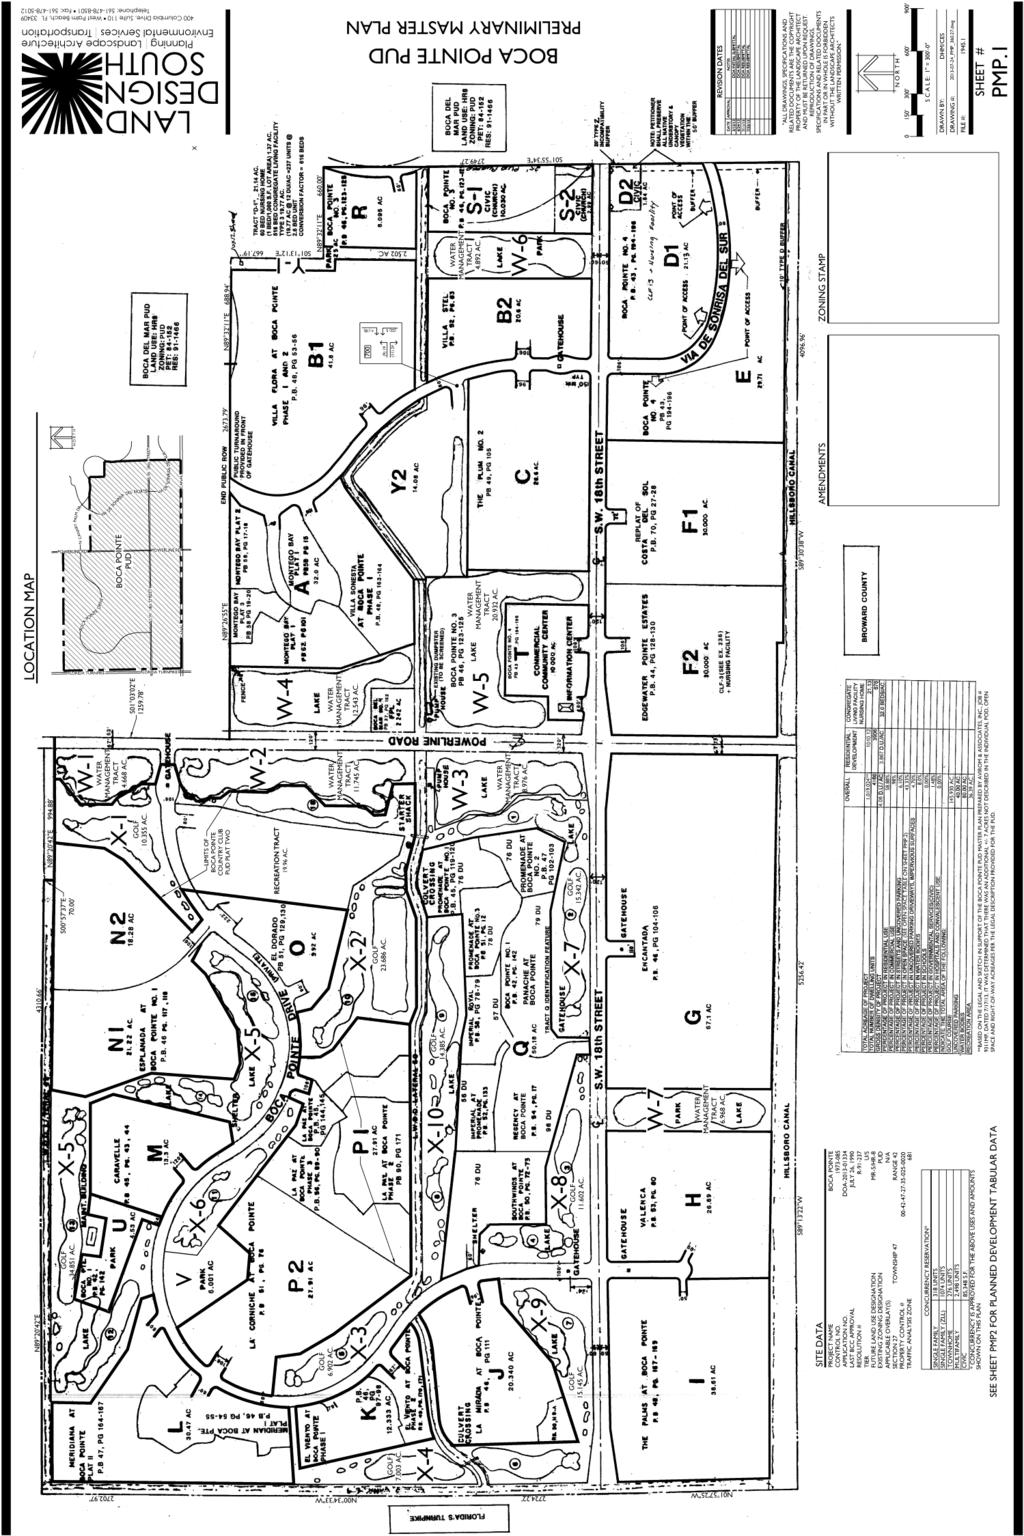 Figure 4 Preliminary Master Plan page 1 dated